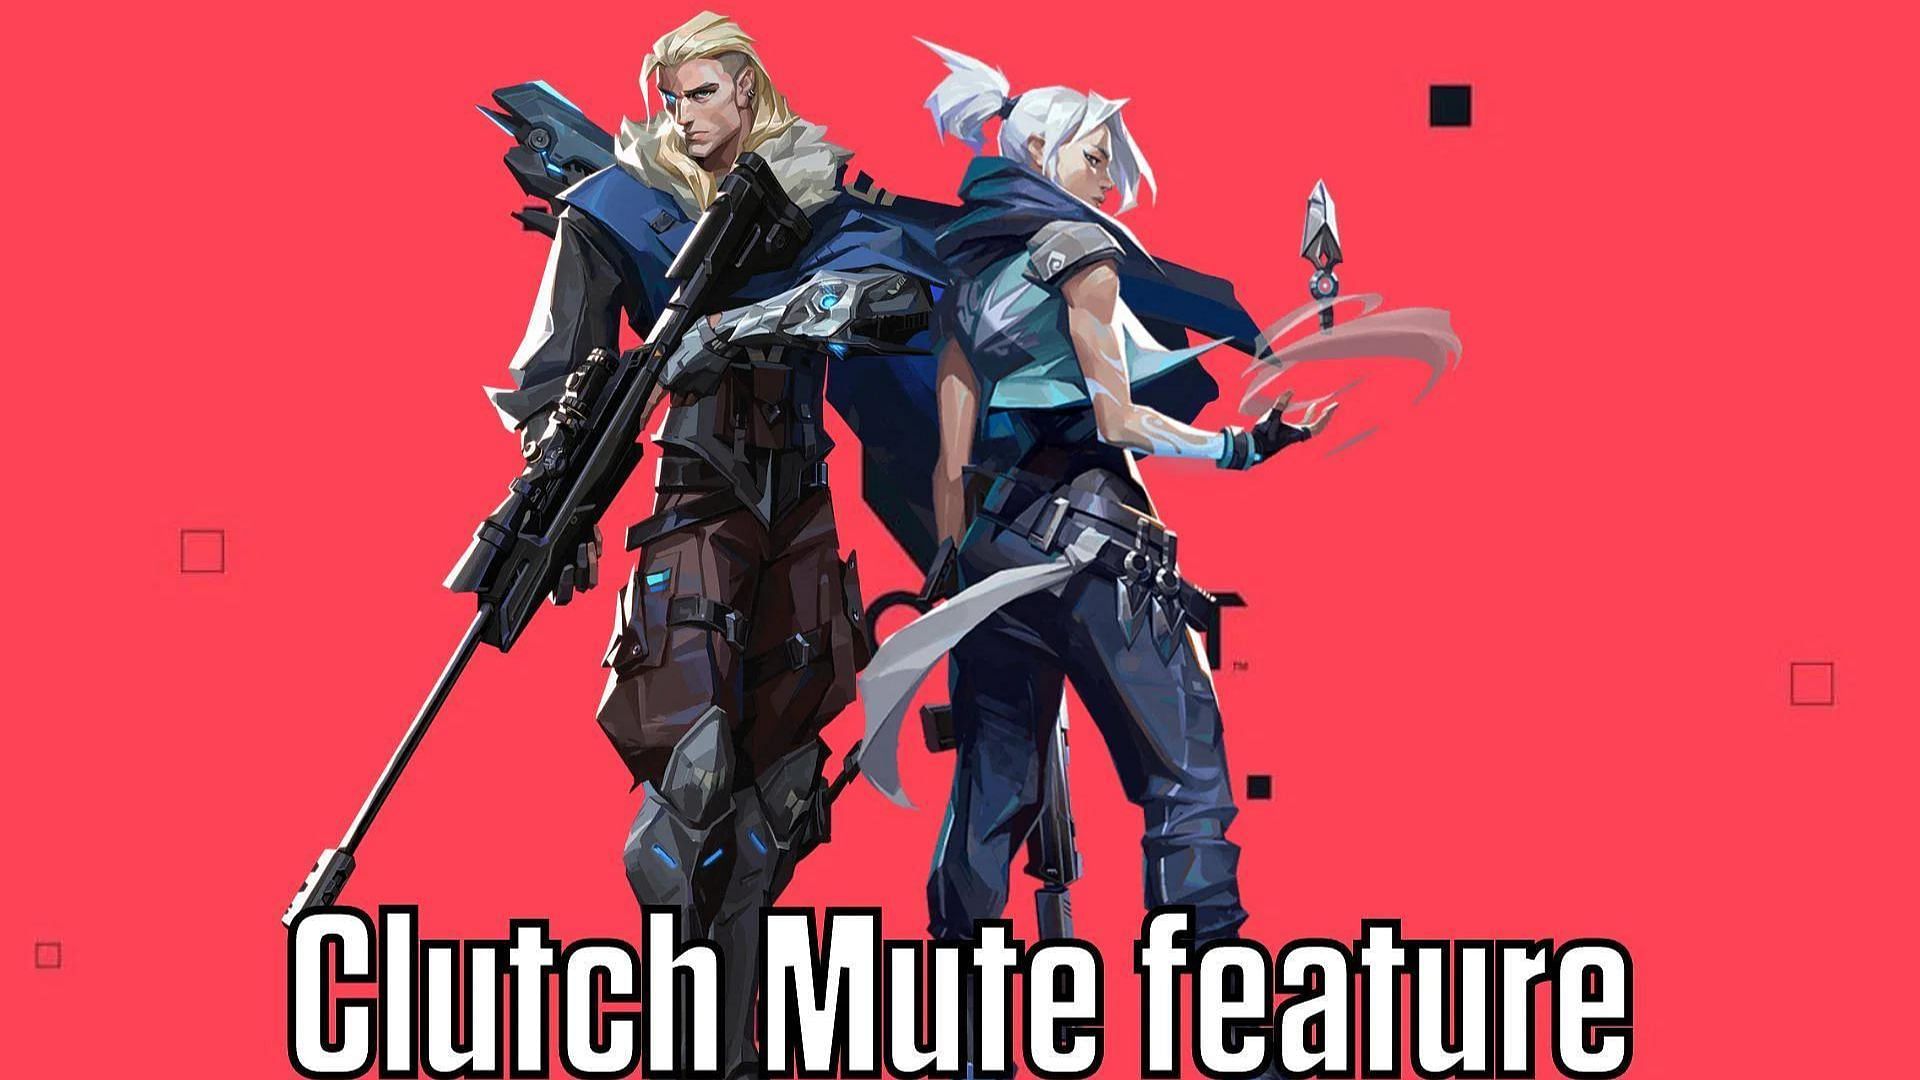 Clutch Mute feature in Valorant coming in Valorant patch 4.11 (Image via Sportskeeda)